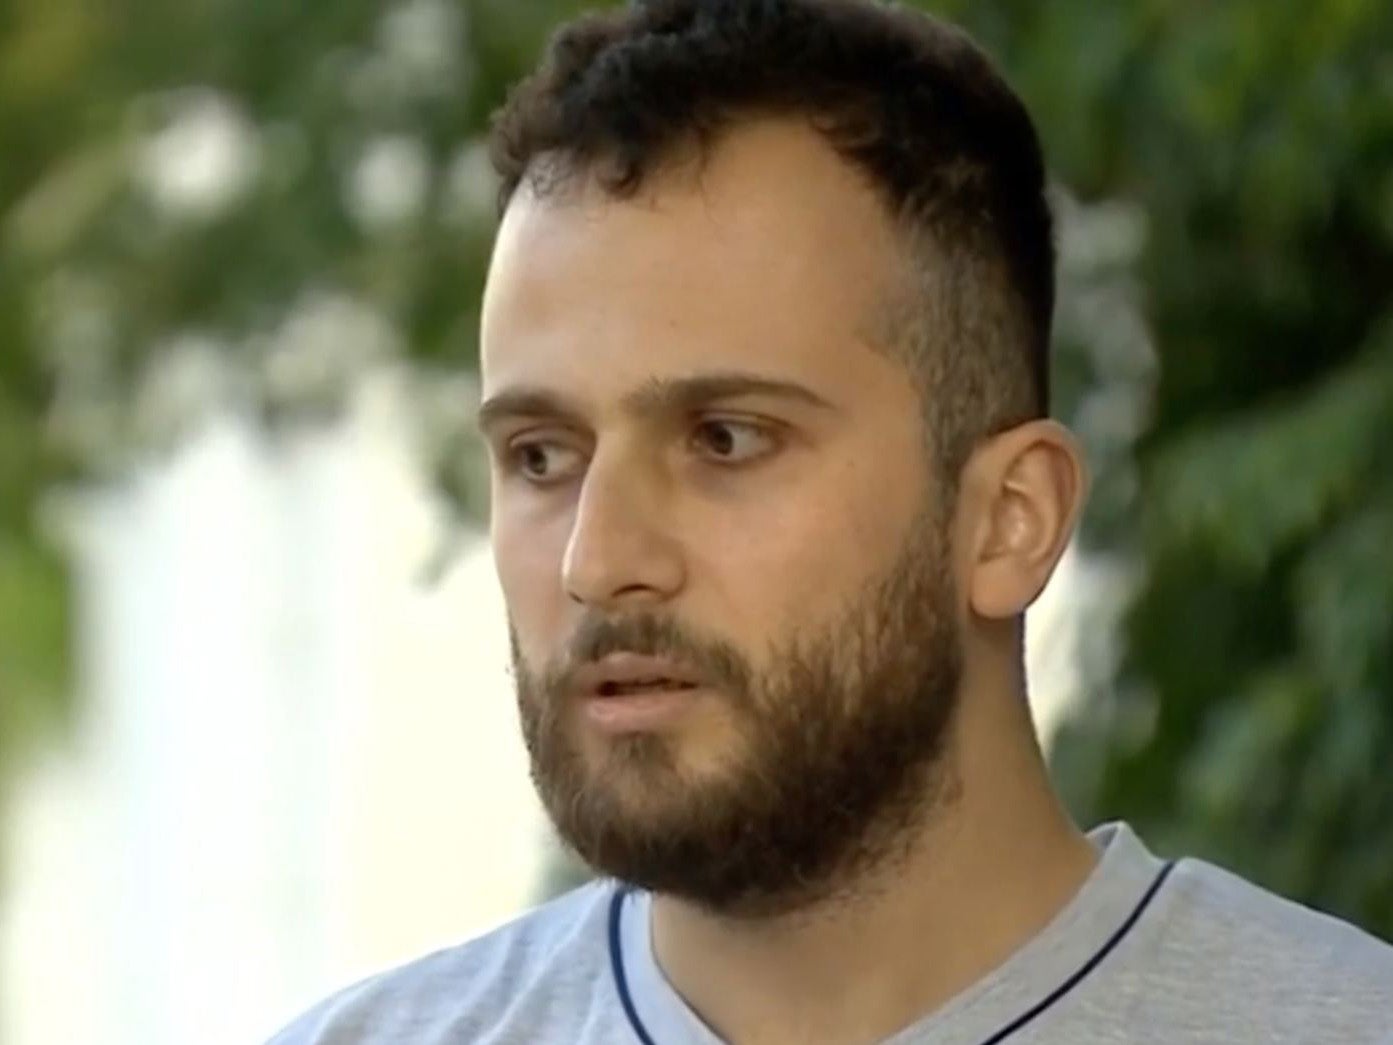 Omar, brother of 23-year-old Mohammad Alhajali, who died in the Grenfell Tower fire